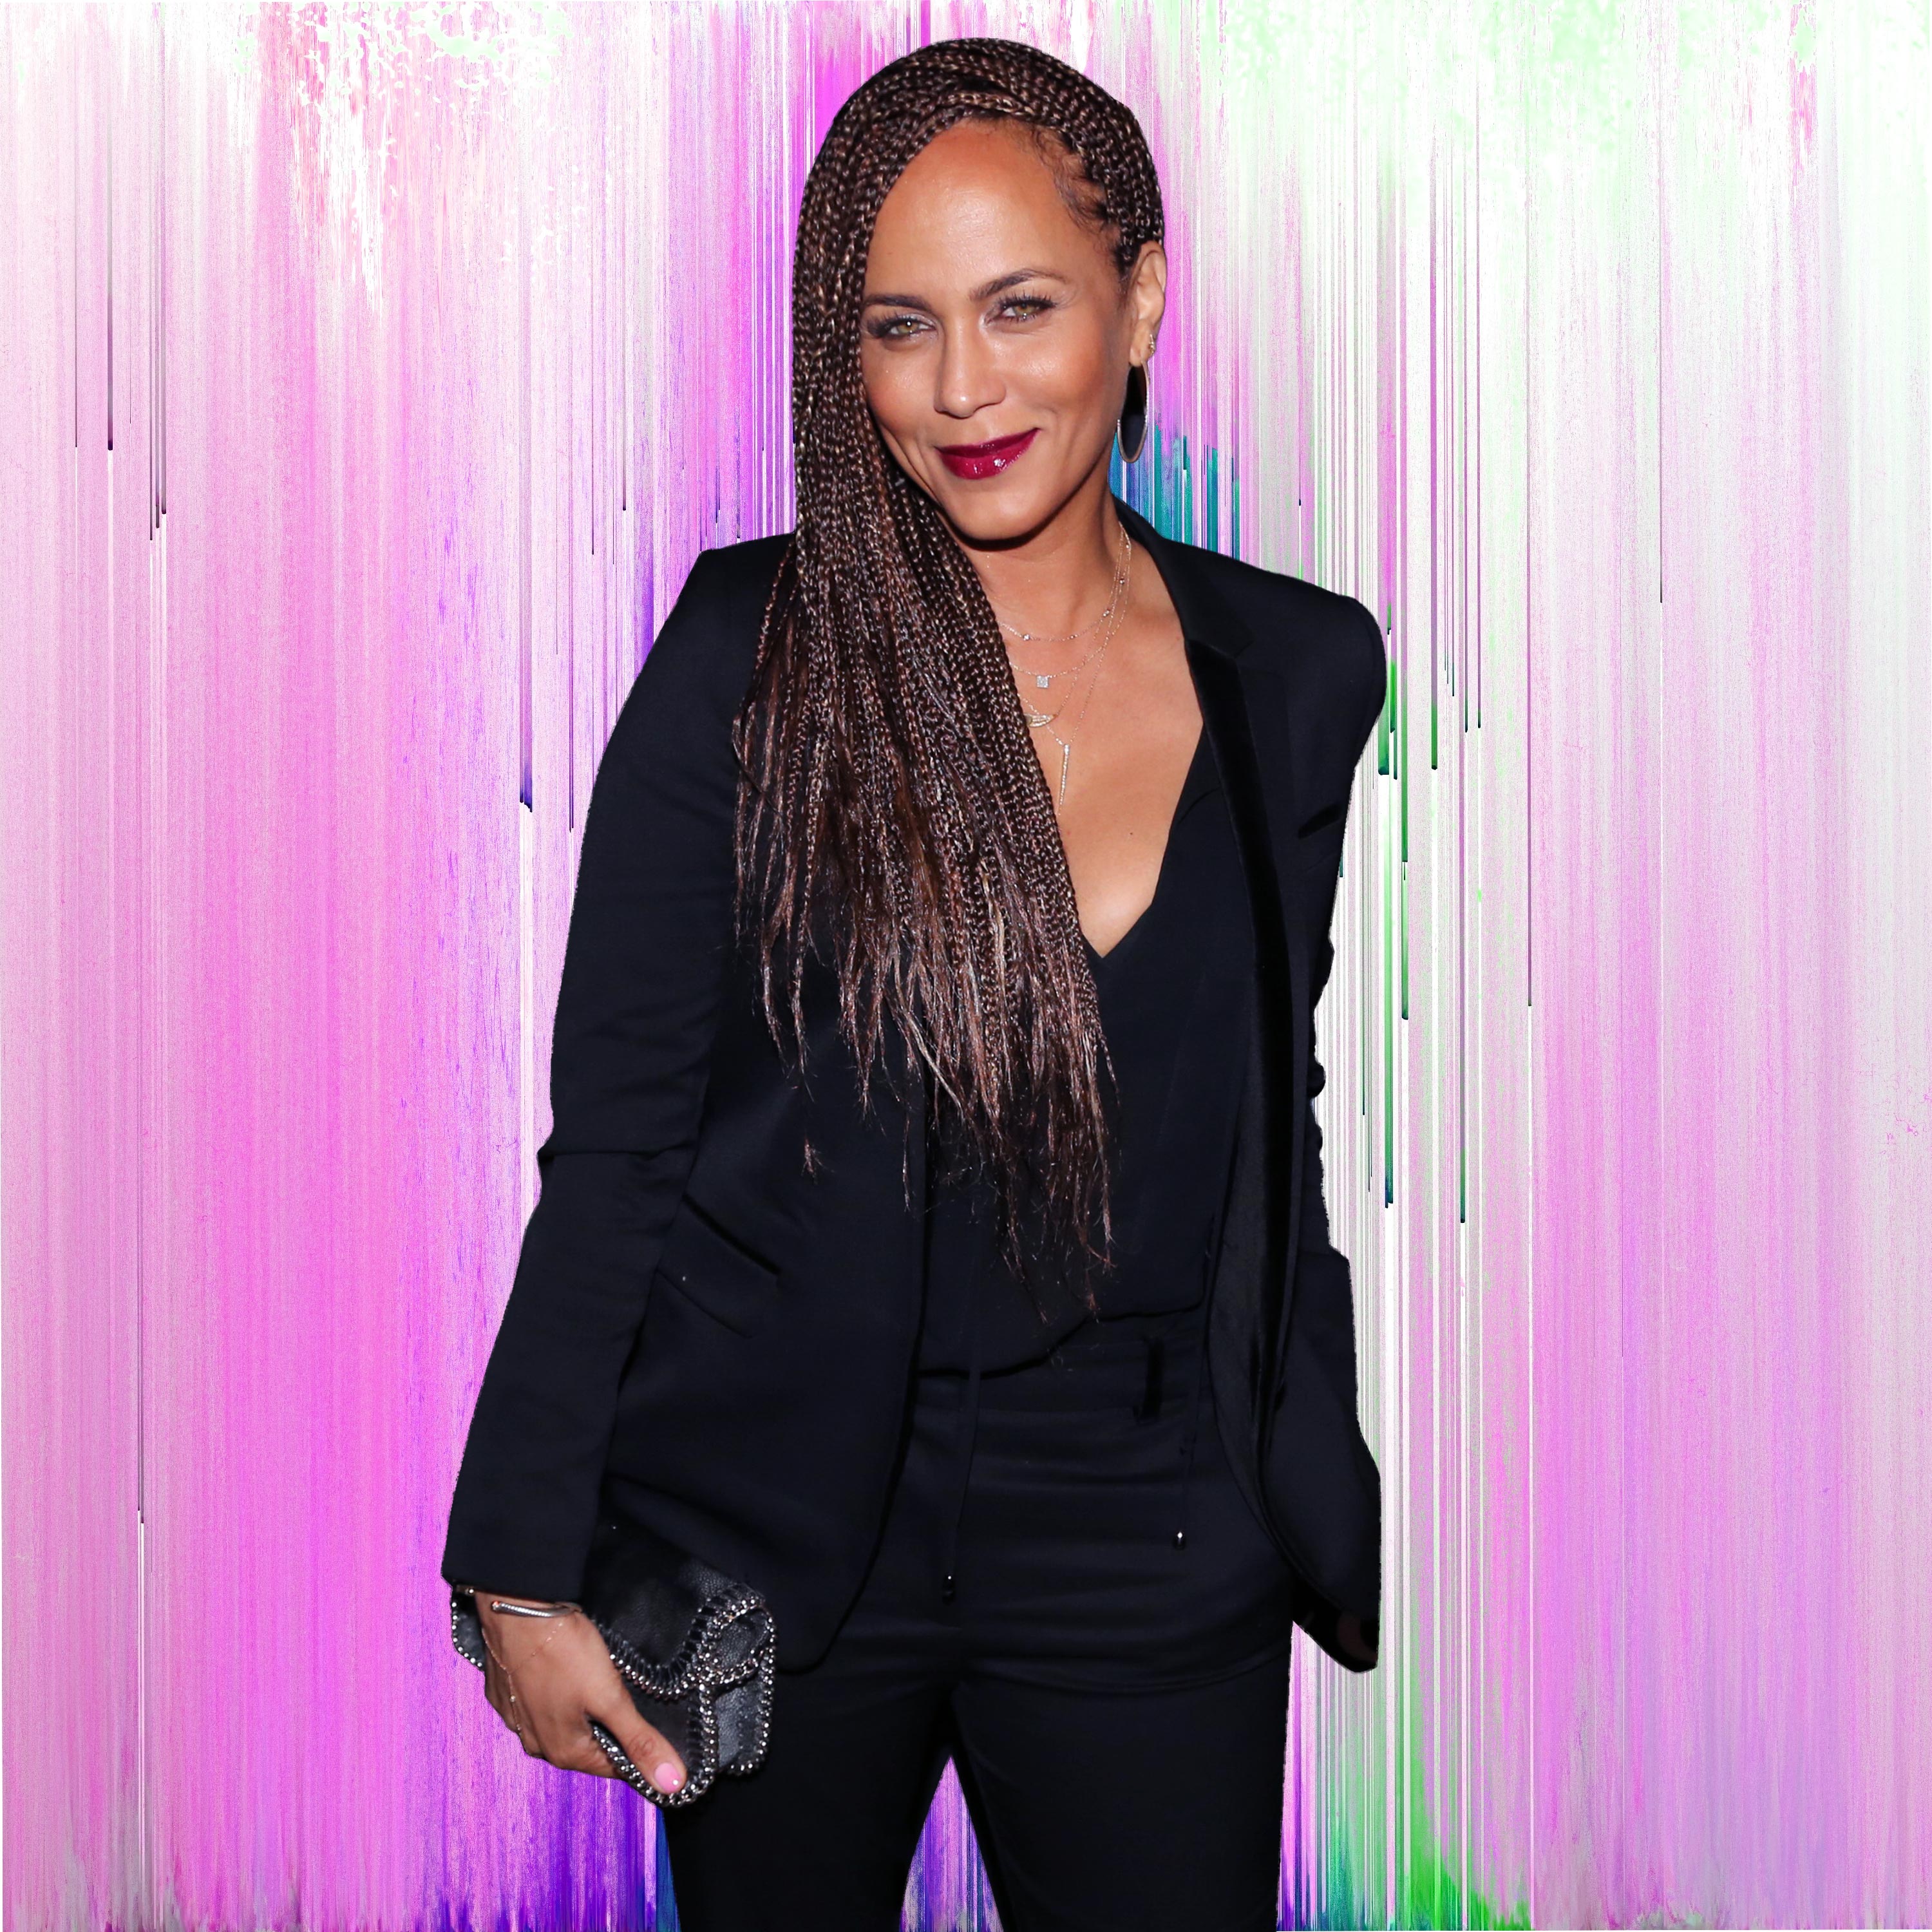 Nicole Ari Parker's Braids and Berry Lipstick Are the Perfect Spring Combo
